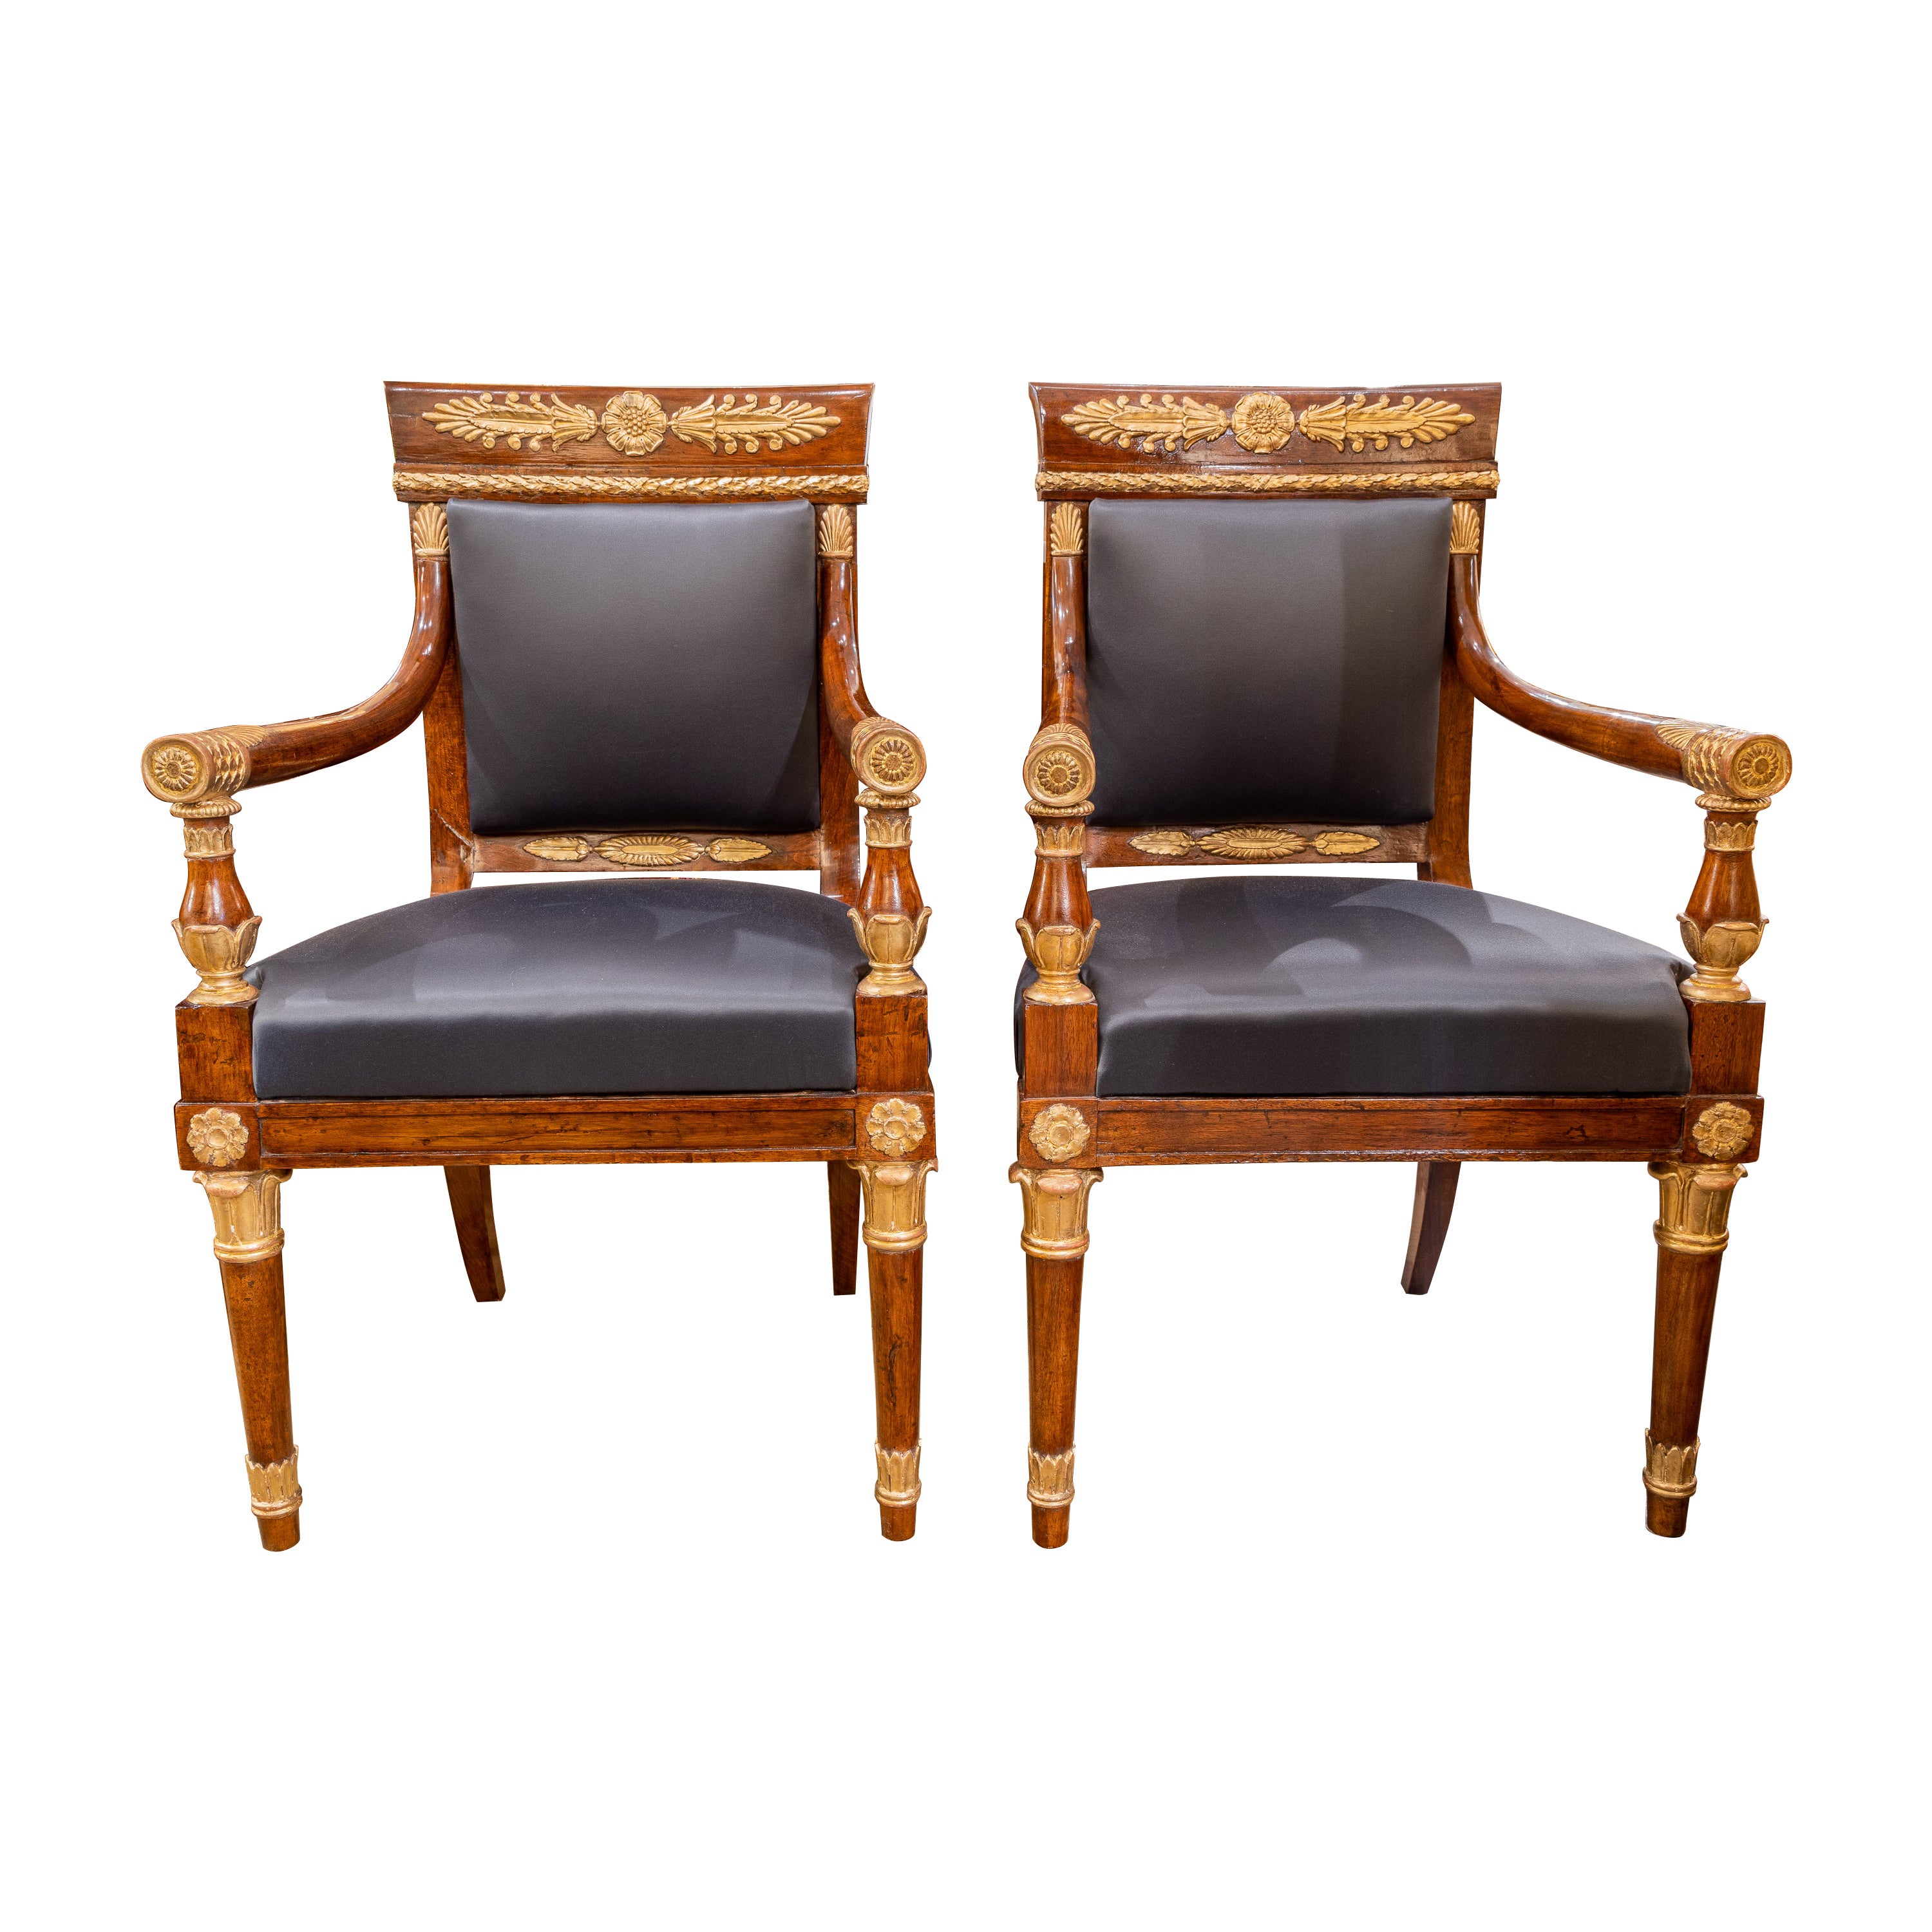 Very Fine and Rare Pair of Early 19th C Italian Empire Carved and Gilt Chairs